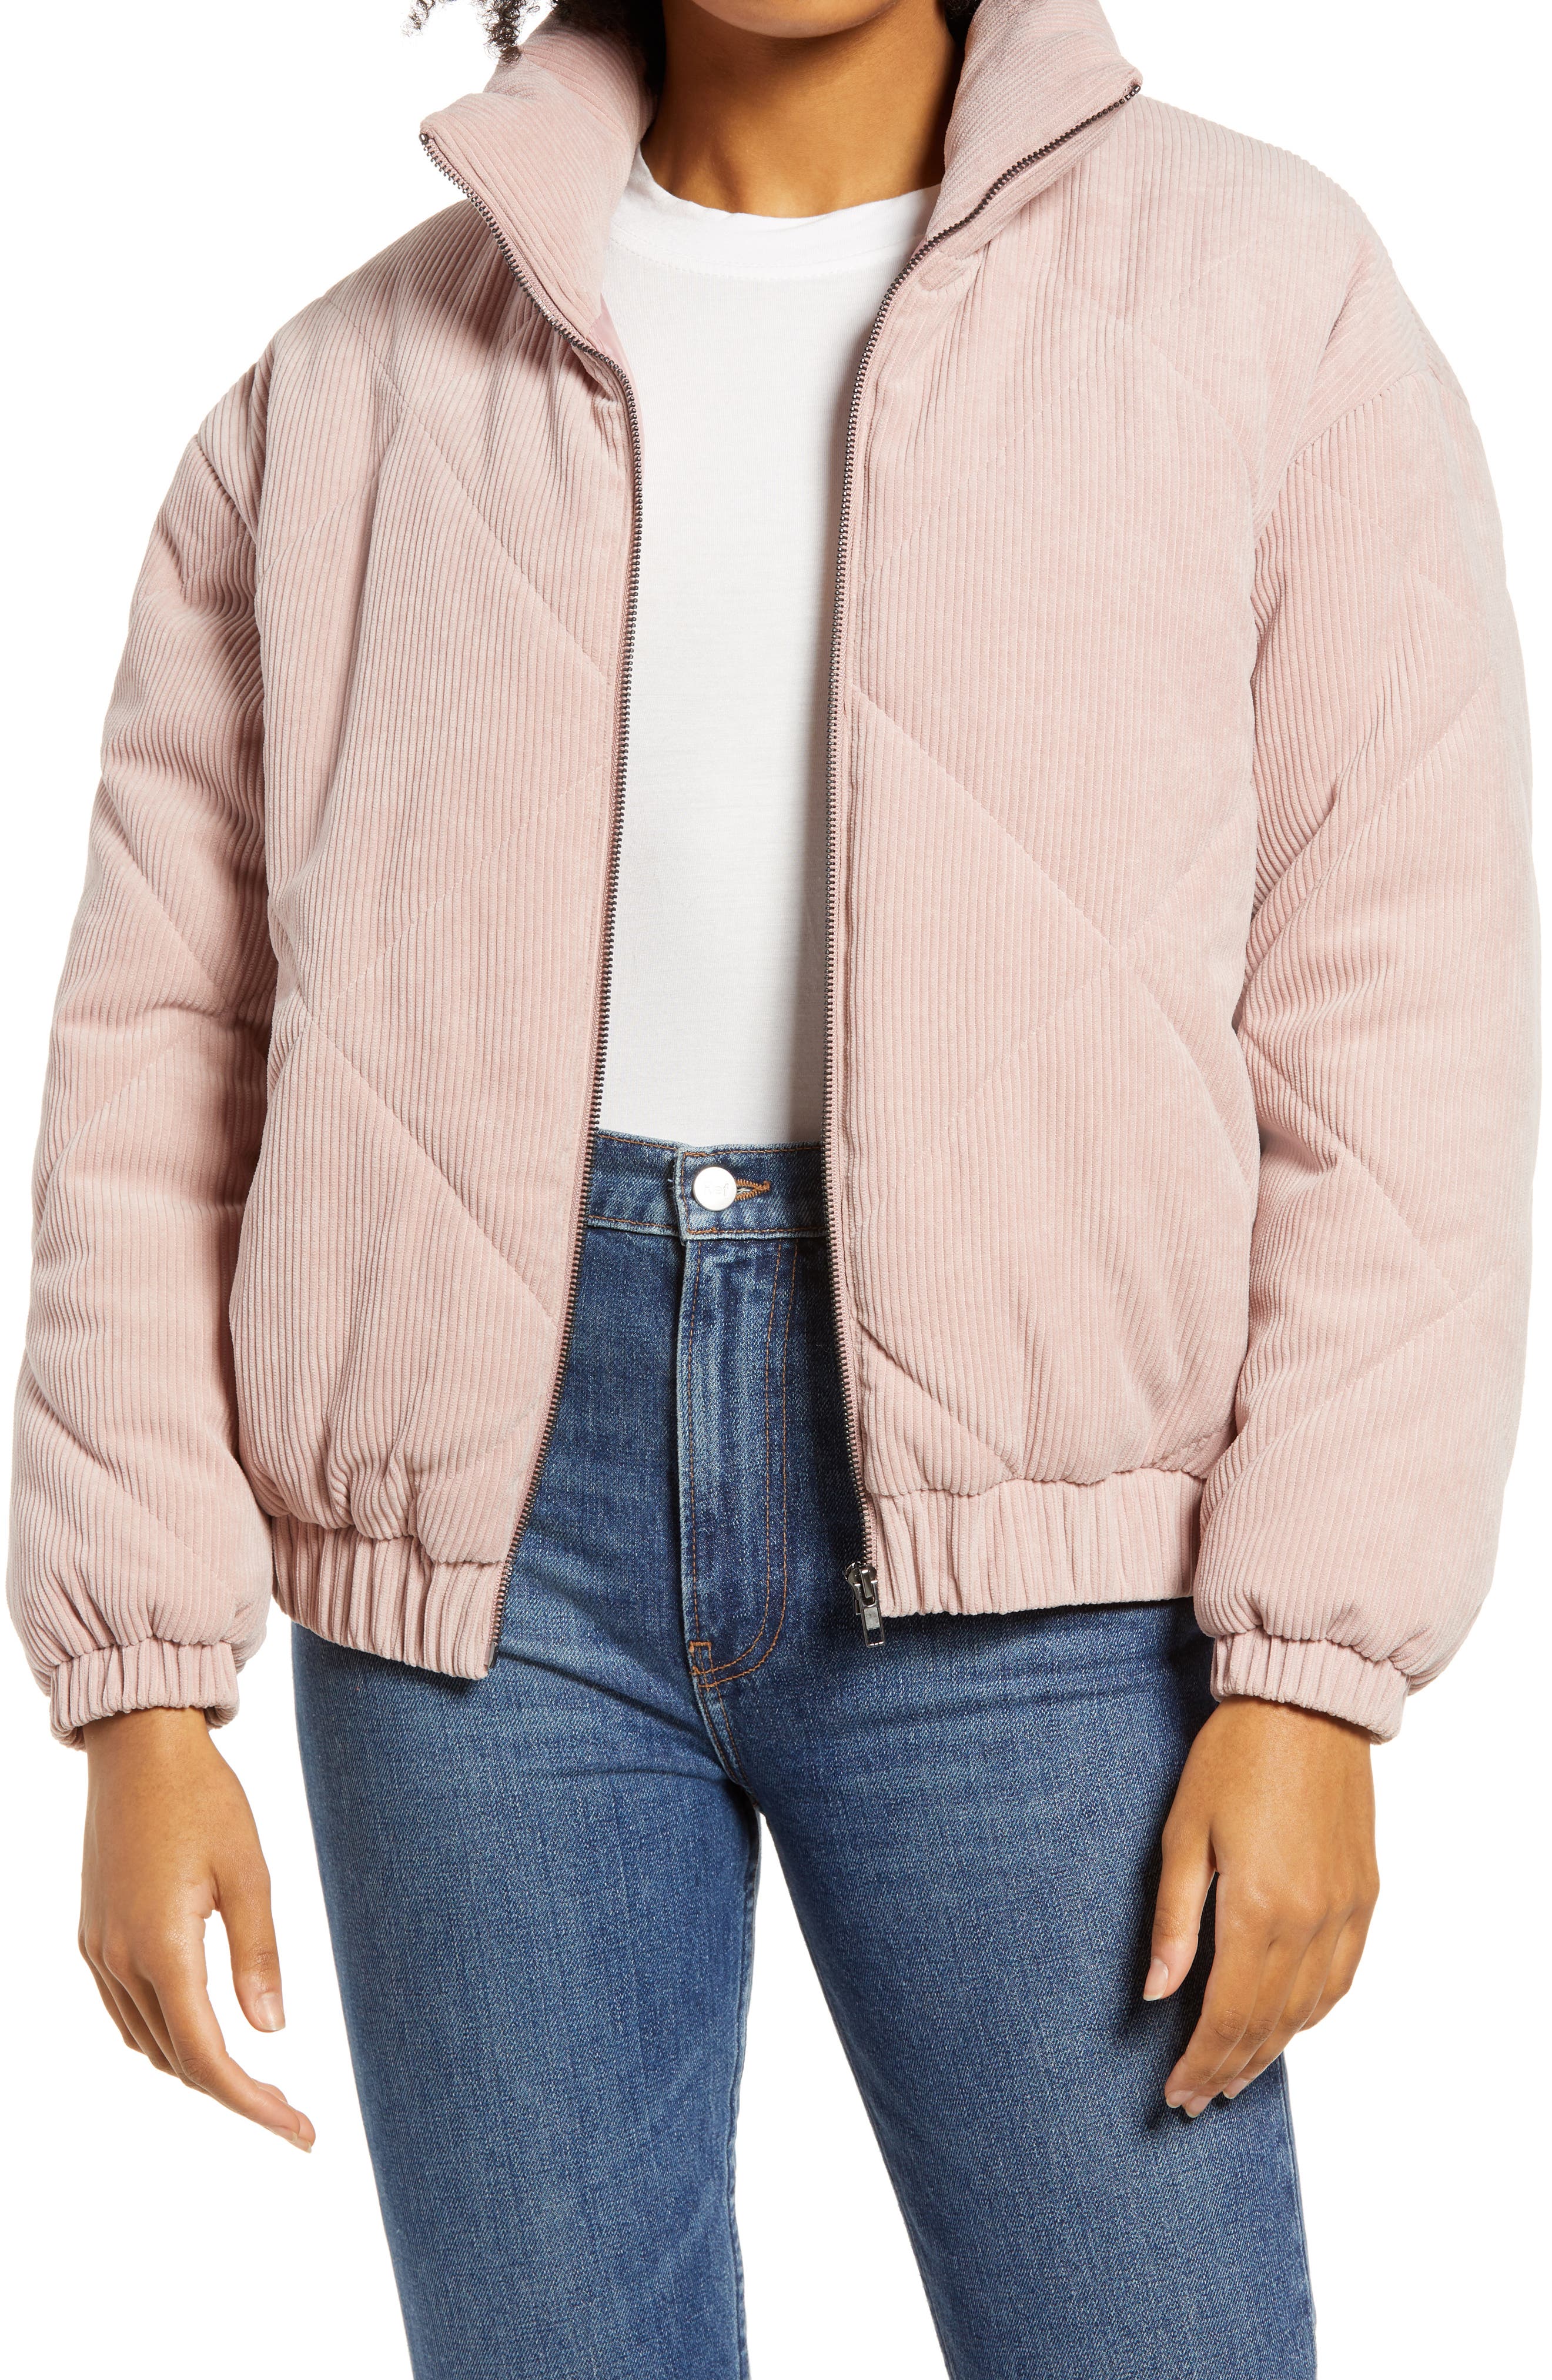 ALL IN FAVOR QUILTED CORDUROY BOMBER JACKET,191446369070